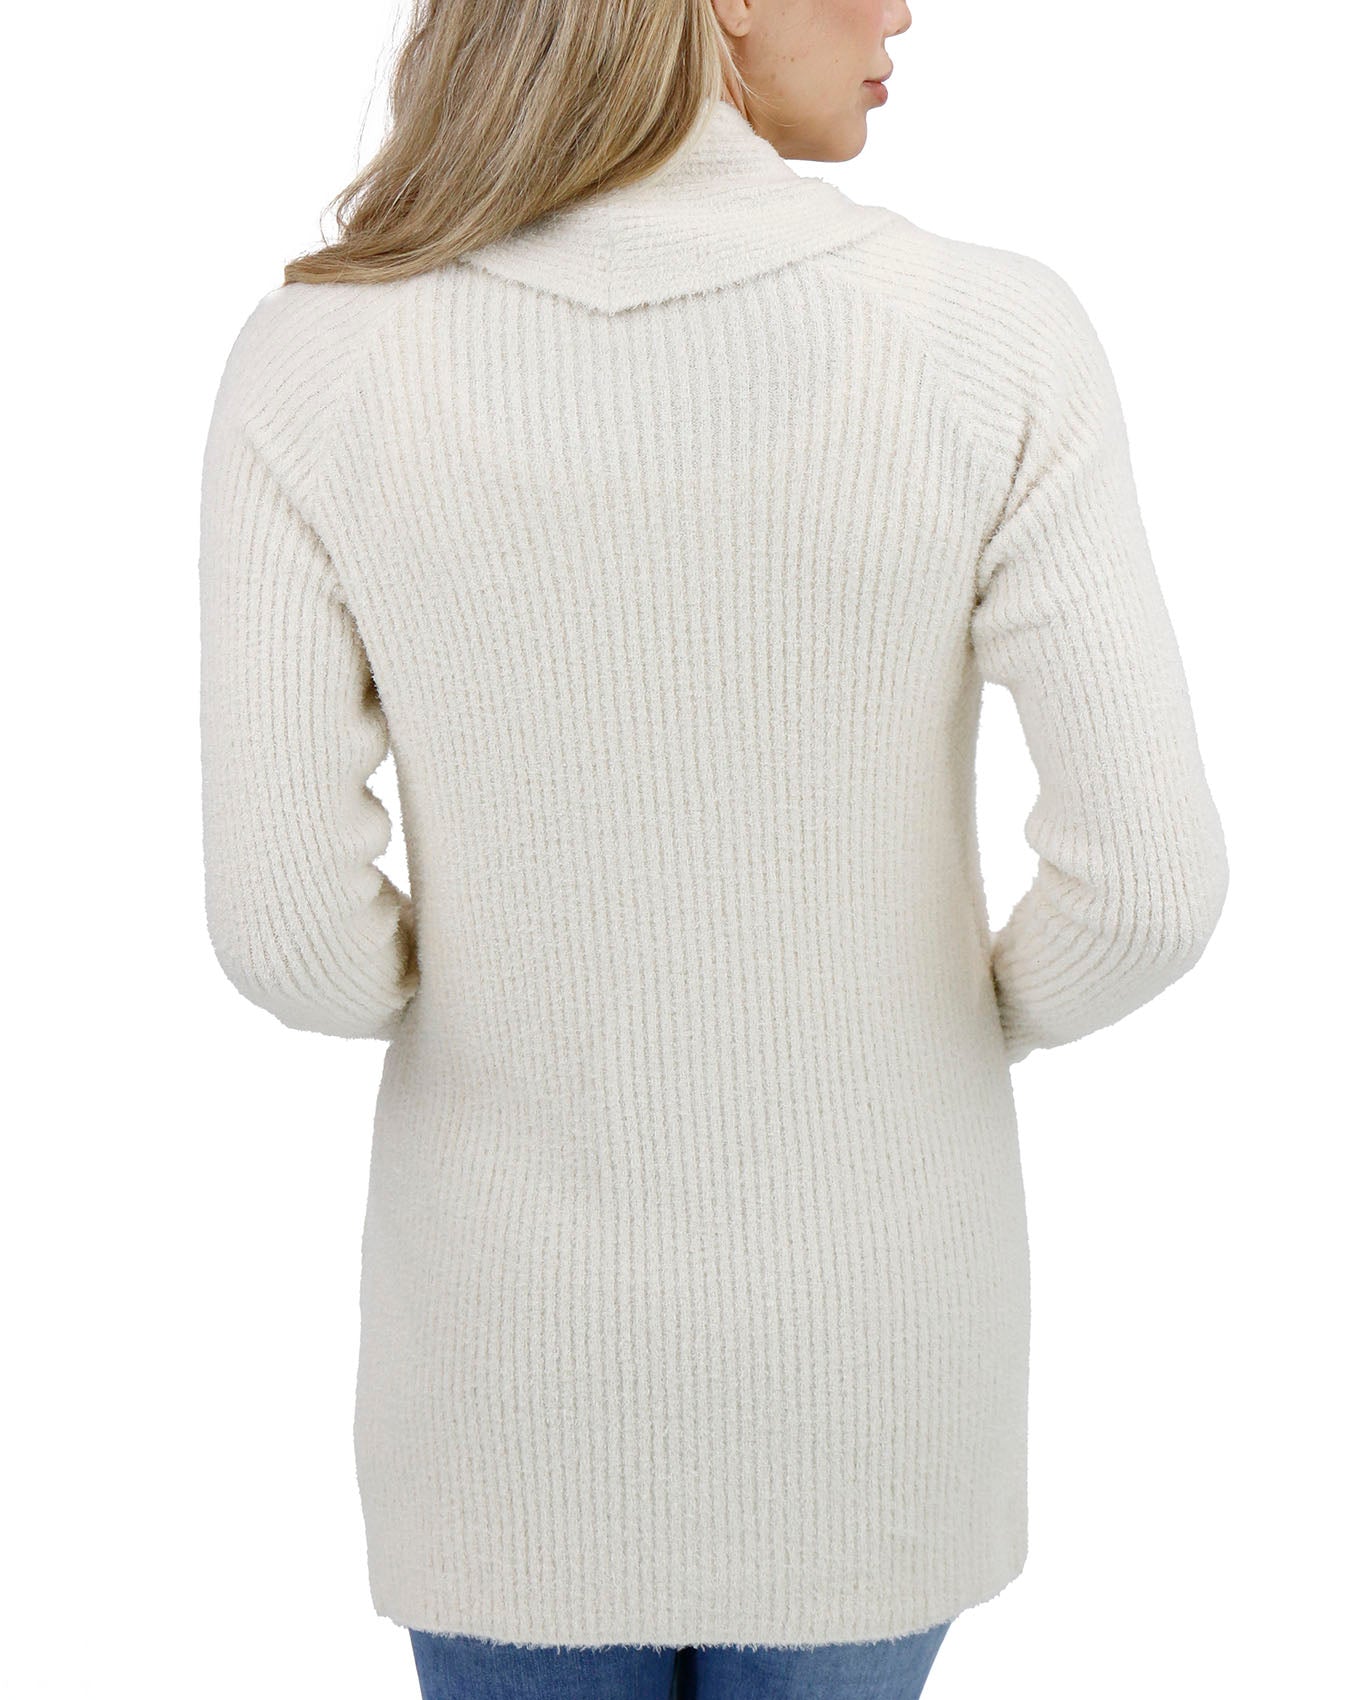 Bambü Cowl Neck French White Cardigan - Grace and Lace